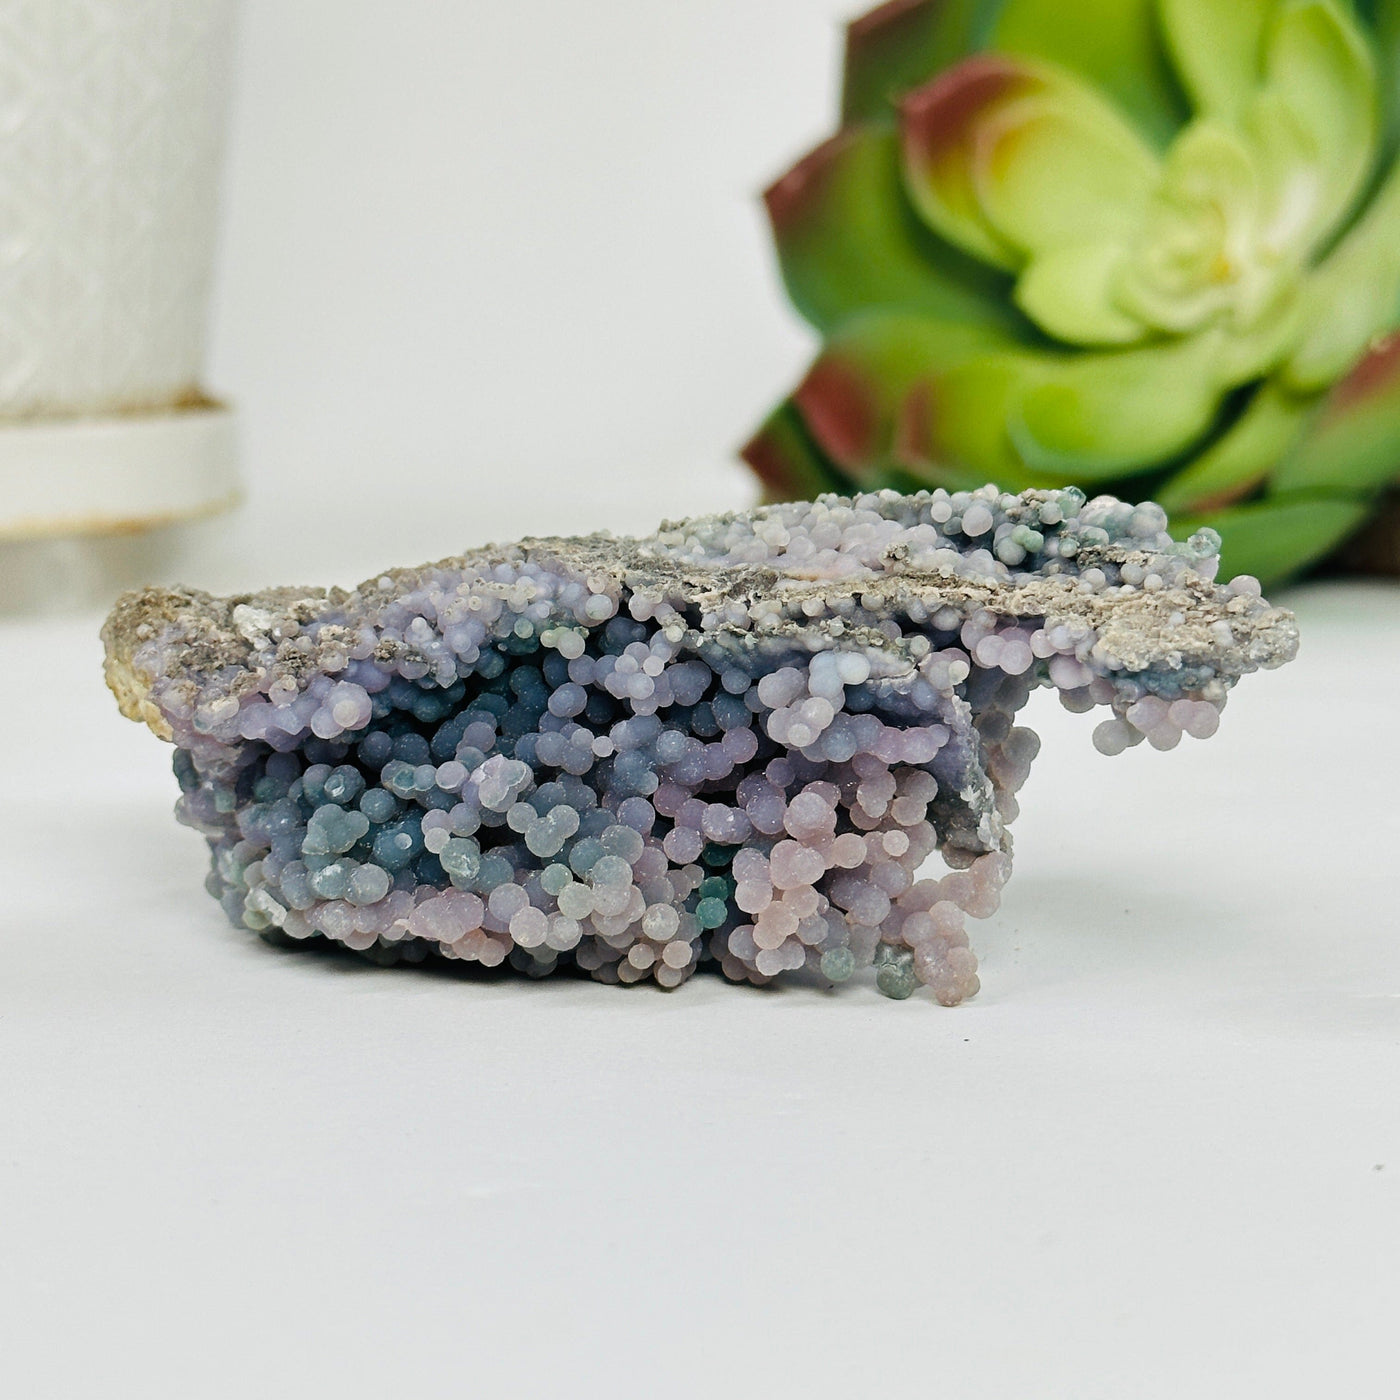 grape agate cluster with decorations in the background